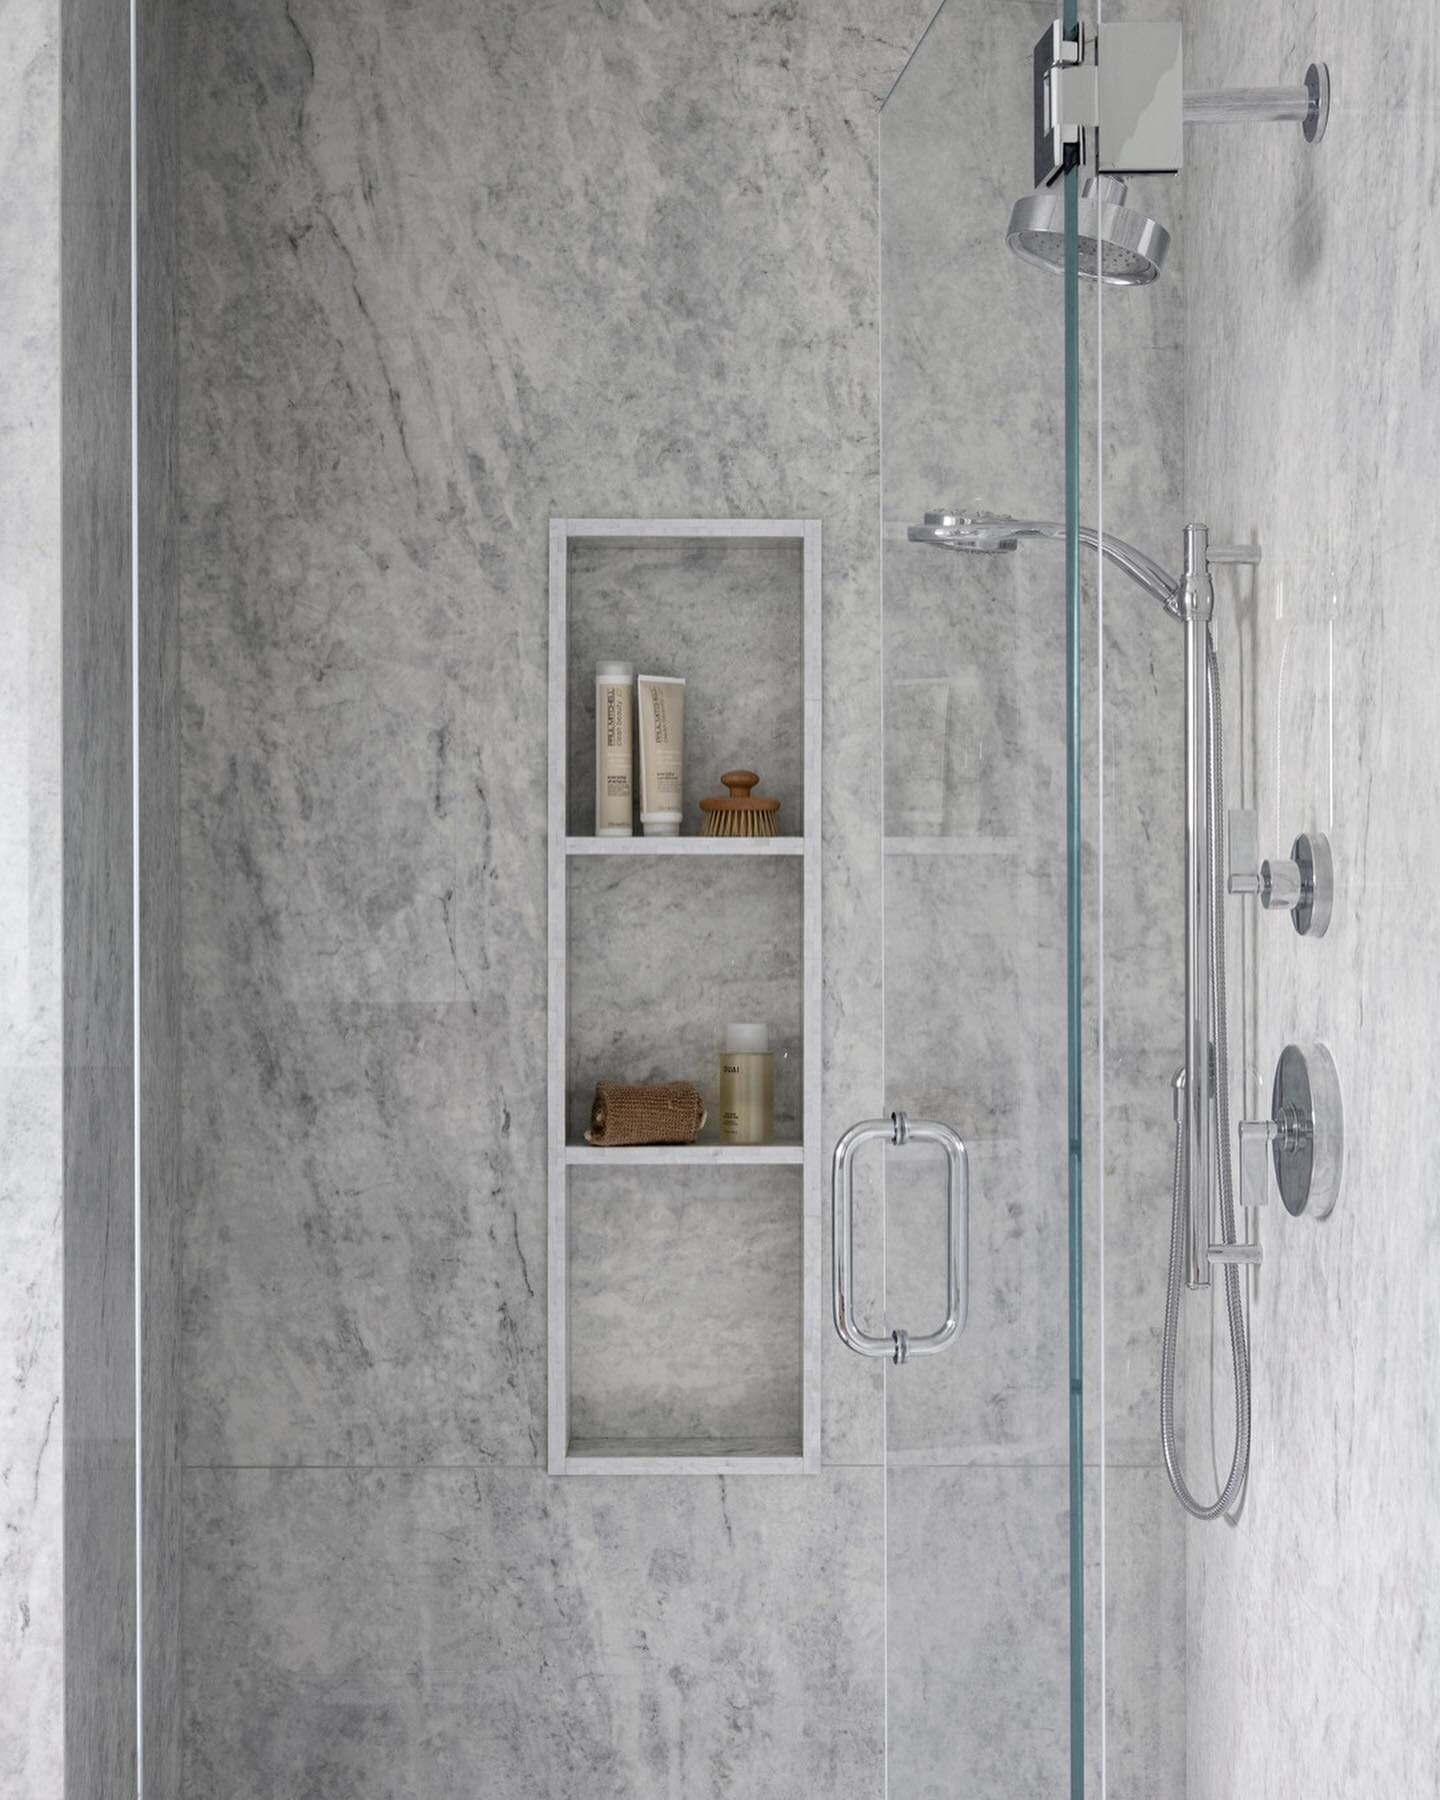 For many of our clients, a shower niche is a MUST. We couldn't agree more. Ease of use is a constant factor in all that we create because your home should be designed to support you.
⠀⠀⠀⠀⠀⠀⠀⠀⠀
Design @vela.creative // Photo @homecomingphotography // 